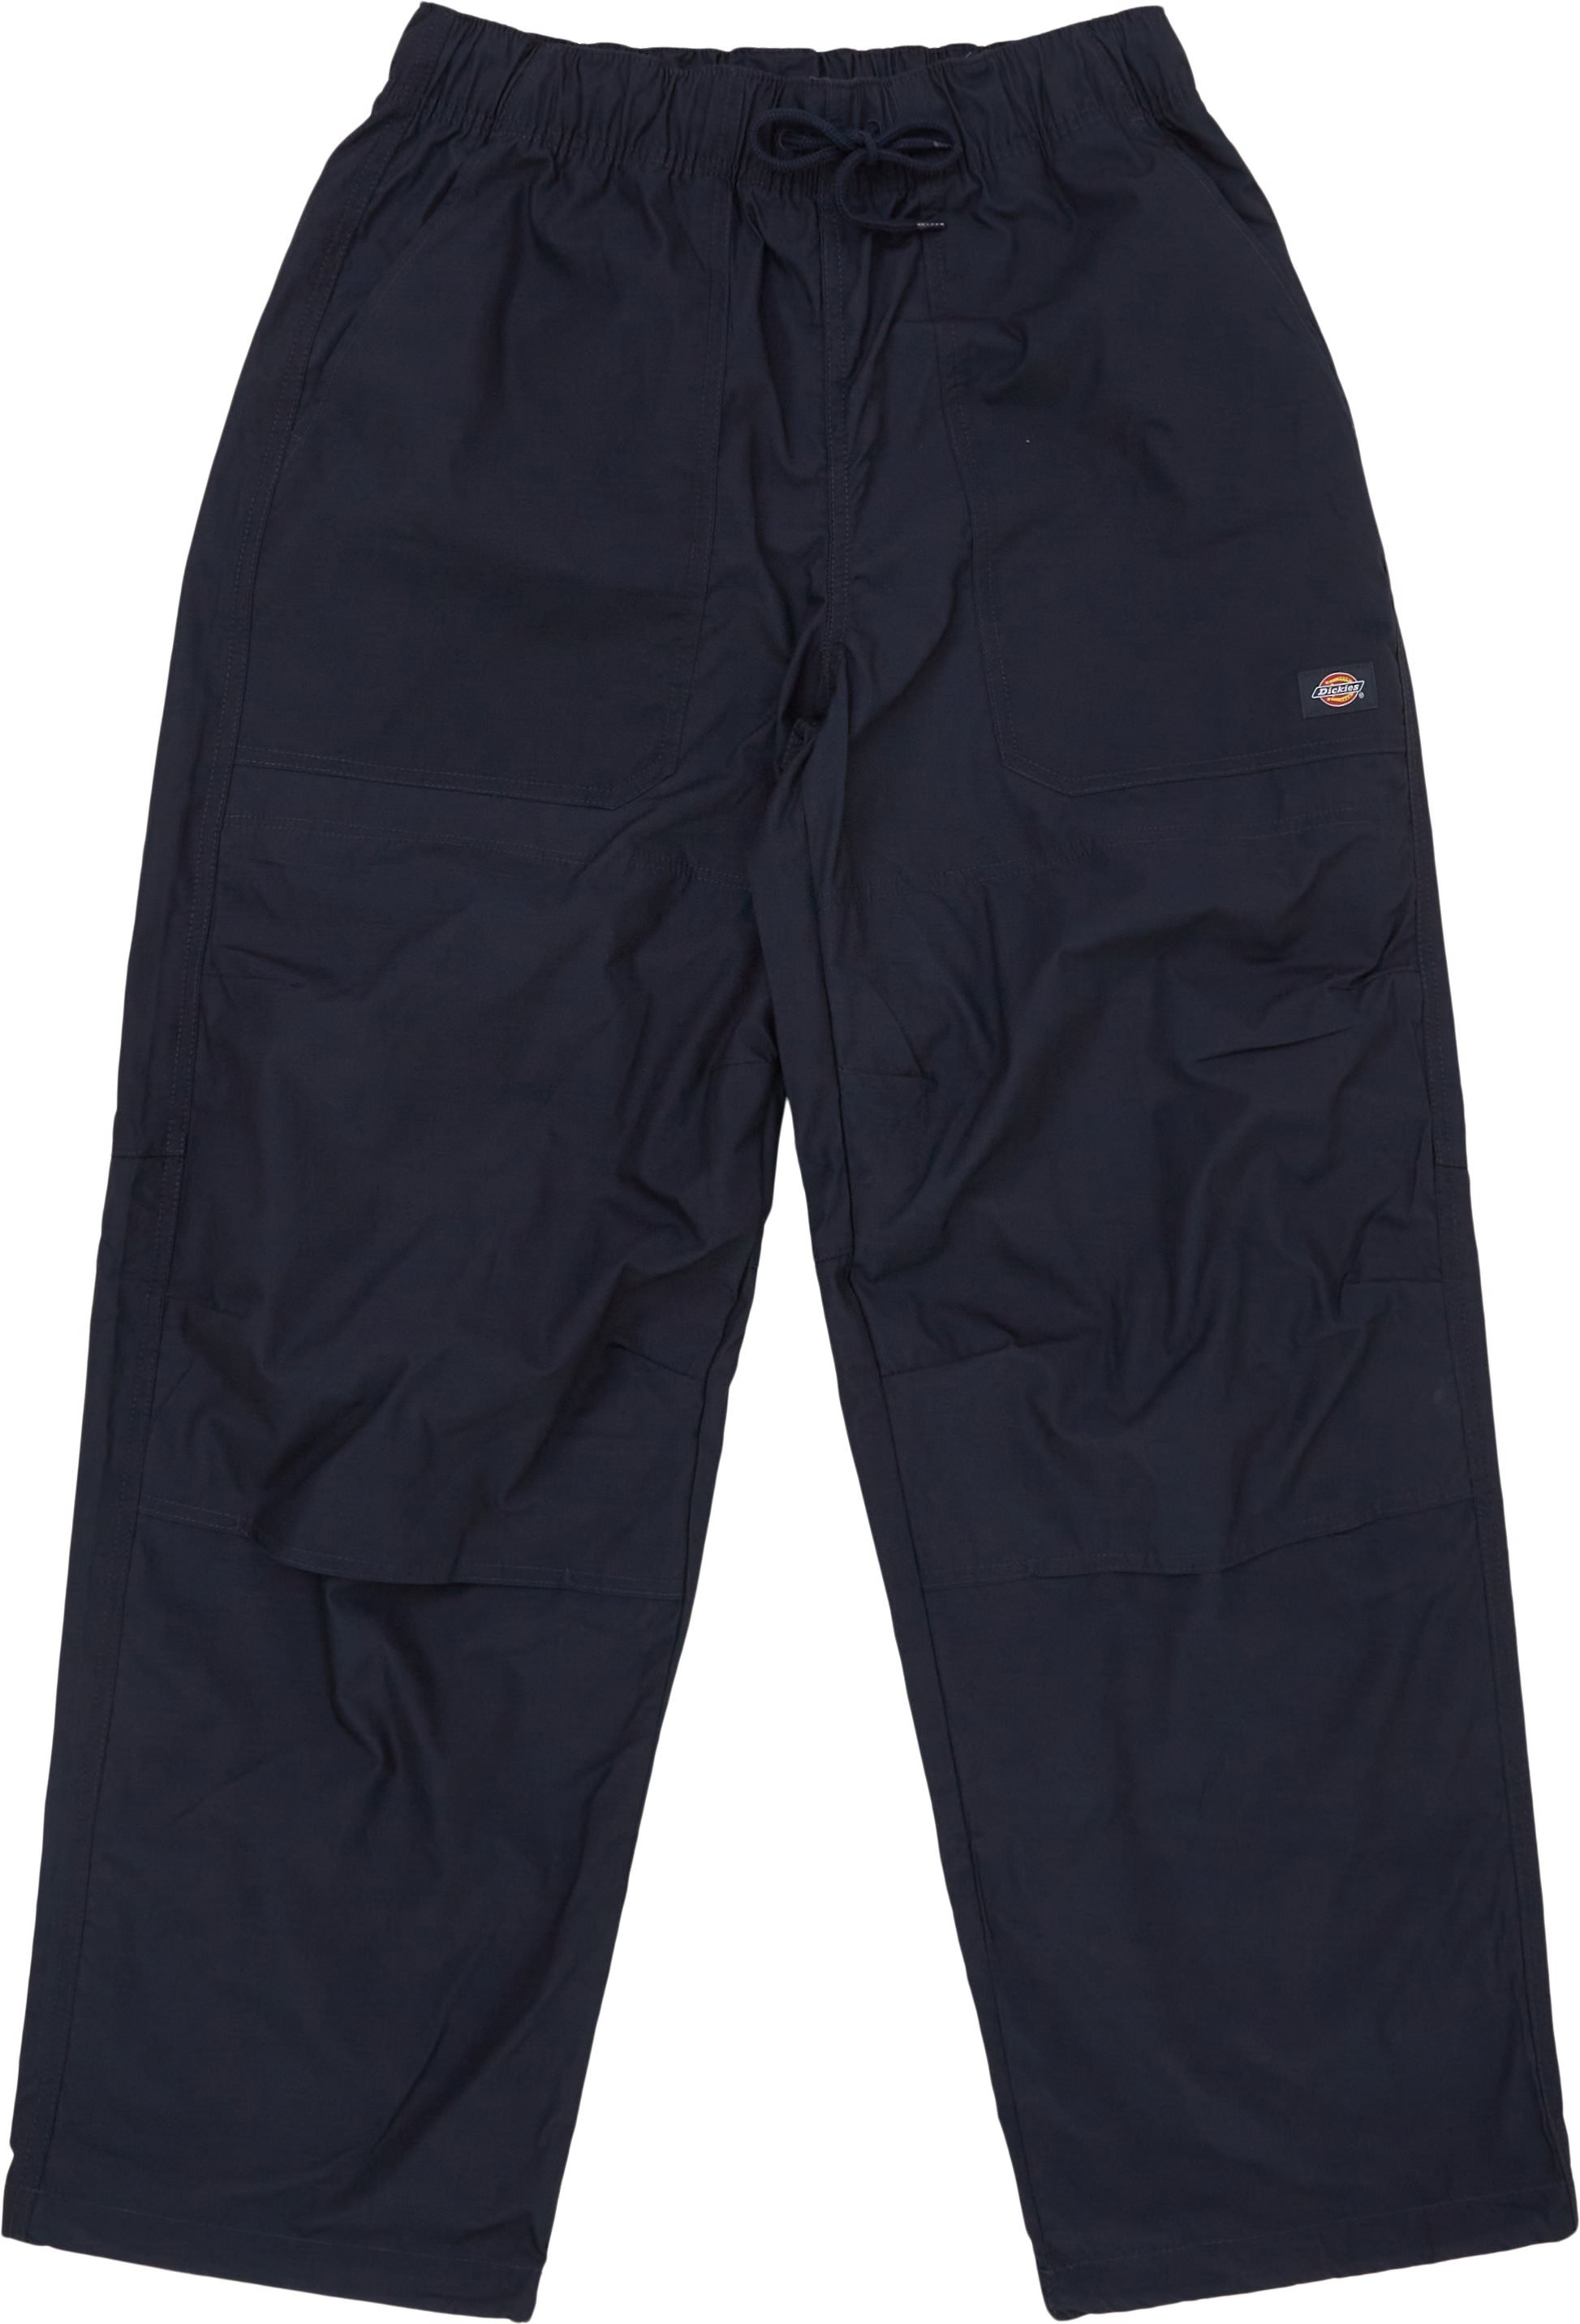 Dickies Trousers FISHERVILLE DK0A4YSDDNX Blue